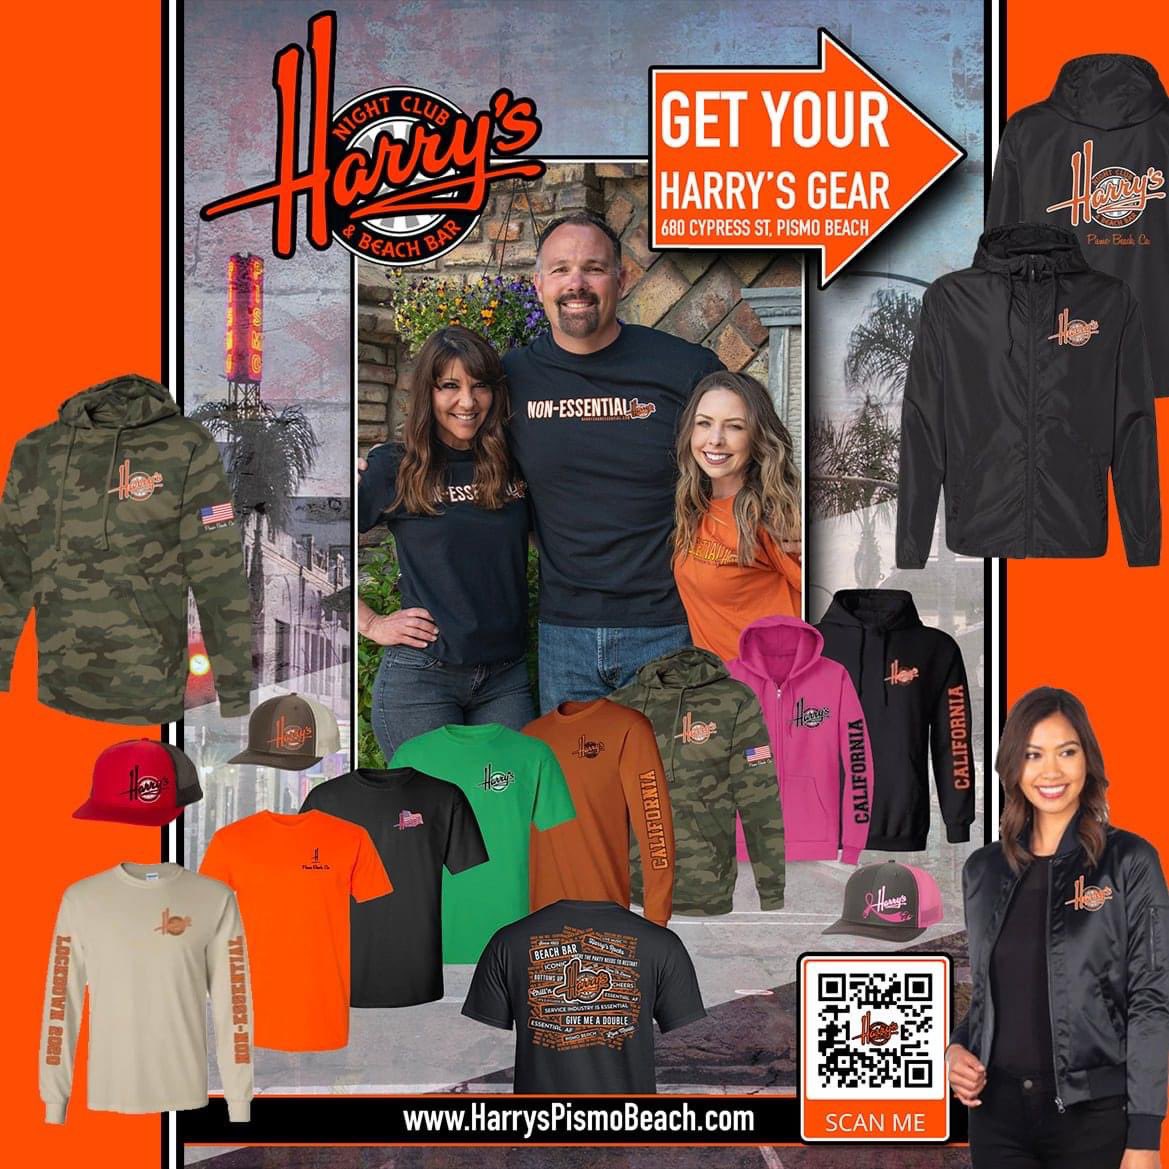 Harry's Gear Store is OPEN today thru Monday! Come by and see us! We have lots of cool gear from hoodies to beach towels to glassware. There's something for everyone! Located right next door to the bar on Cypress St.
Open Fri-Mon 11-4pm

#harryspismobeach #harrysgear #pismobeach